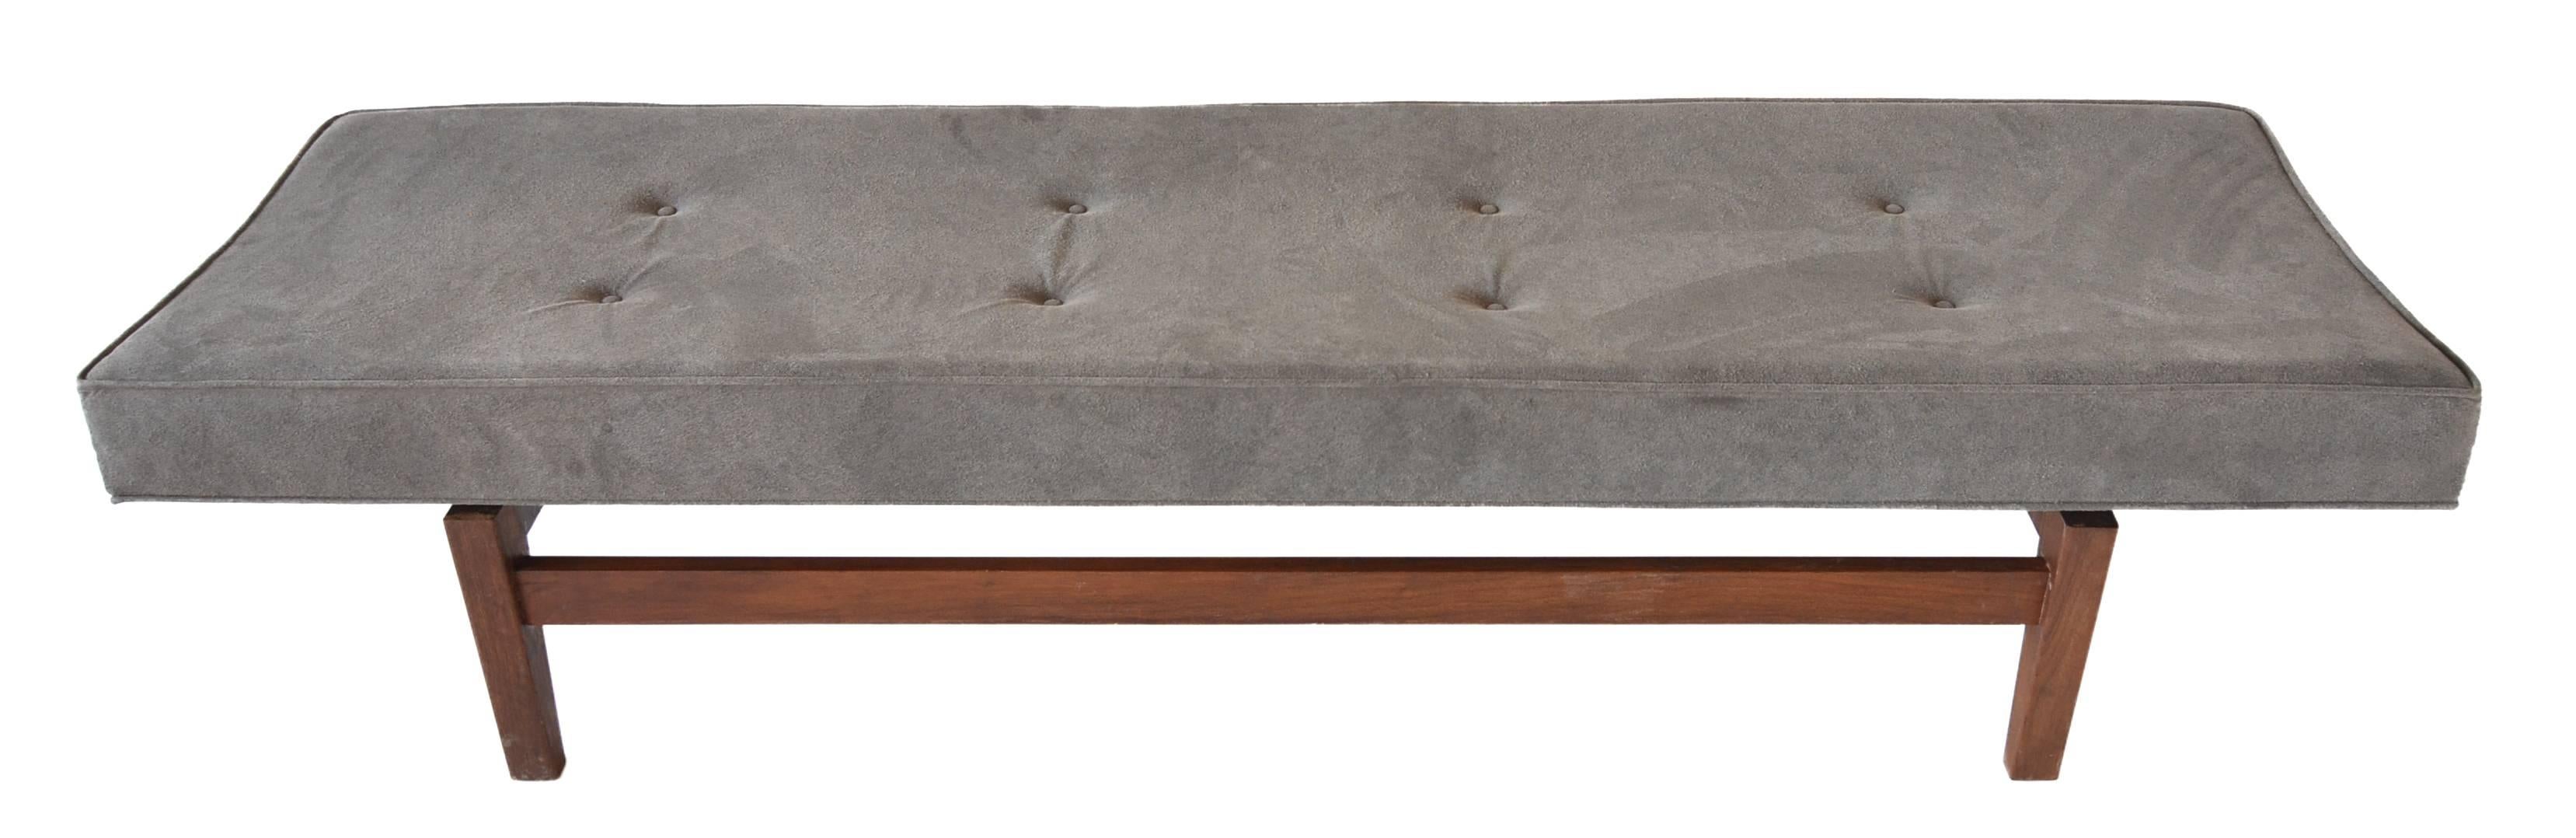 A terrific 6' long bench by Danish American designer Jens Risom. 

A great form with a curved bench seat sitting on a solid walnut floating base. 

Recently reupholstered in beautiful suede.

 